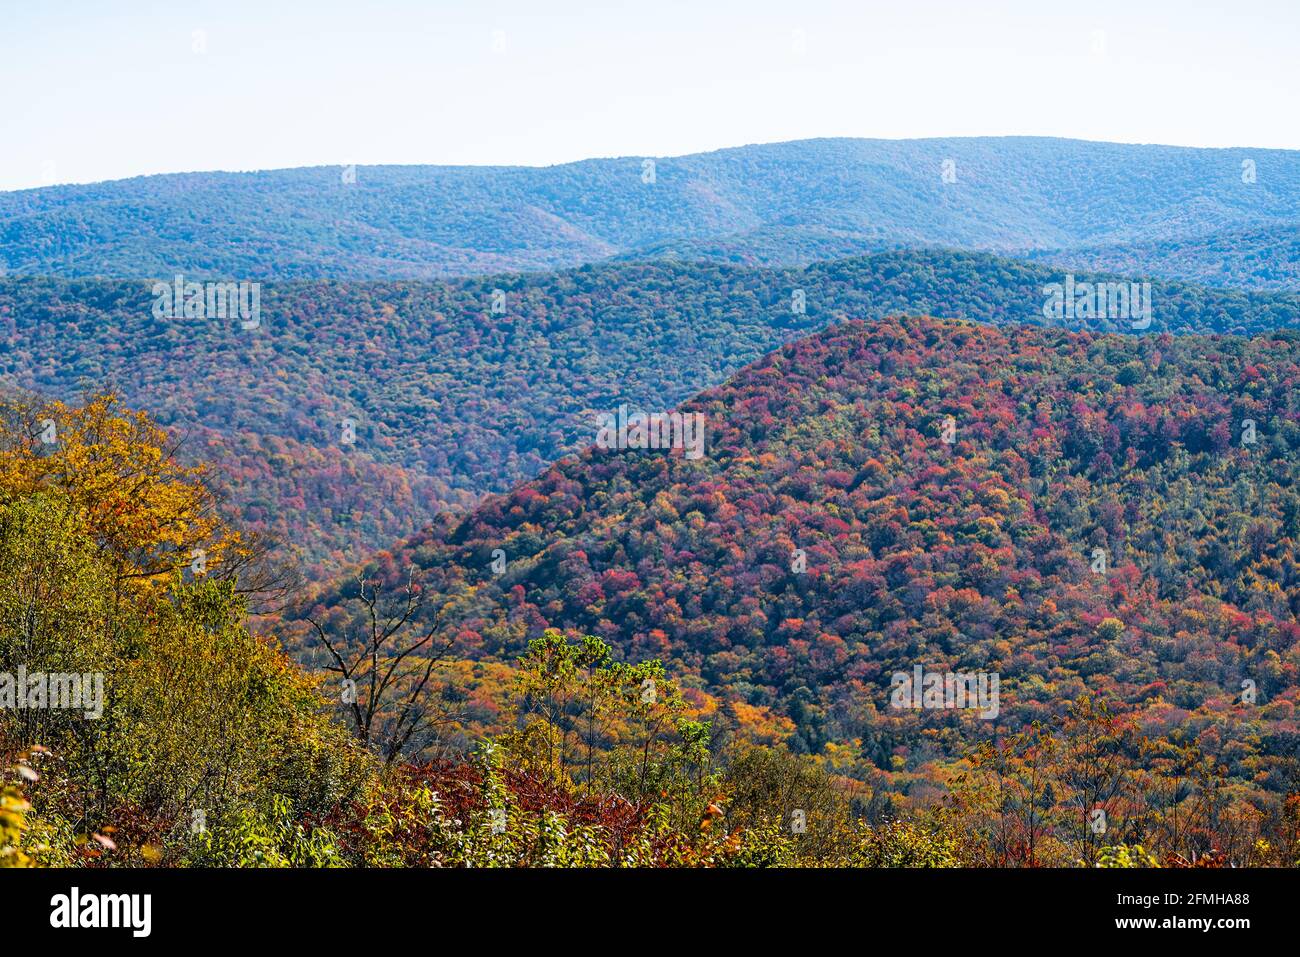 High angle aerial overlook view on Cheat knob mountain in West Virginia Monongahela national forest amid Allegheny mountains in autumn with colorful m Stock Photo